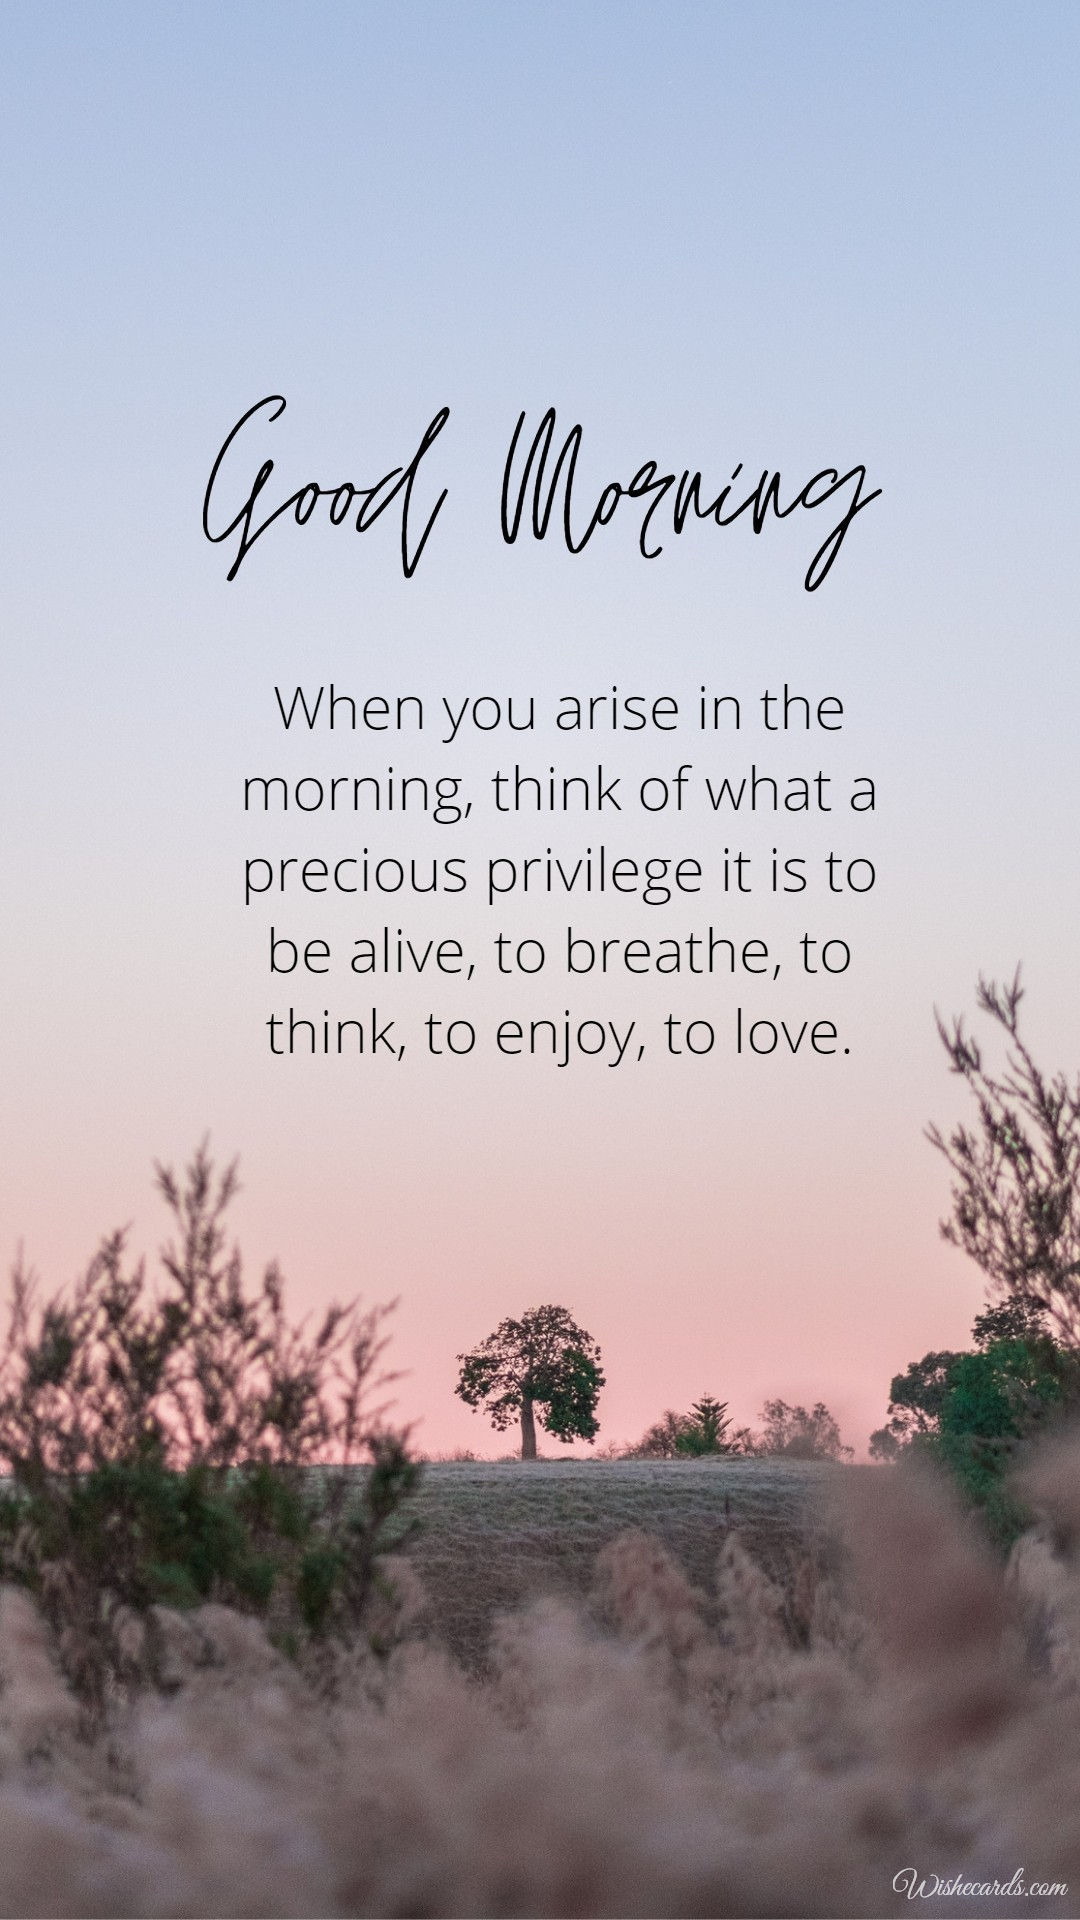 Good Morning Inspirational Images with Motivational Wishes and Quotes